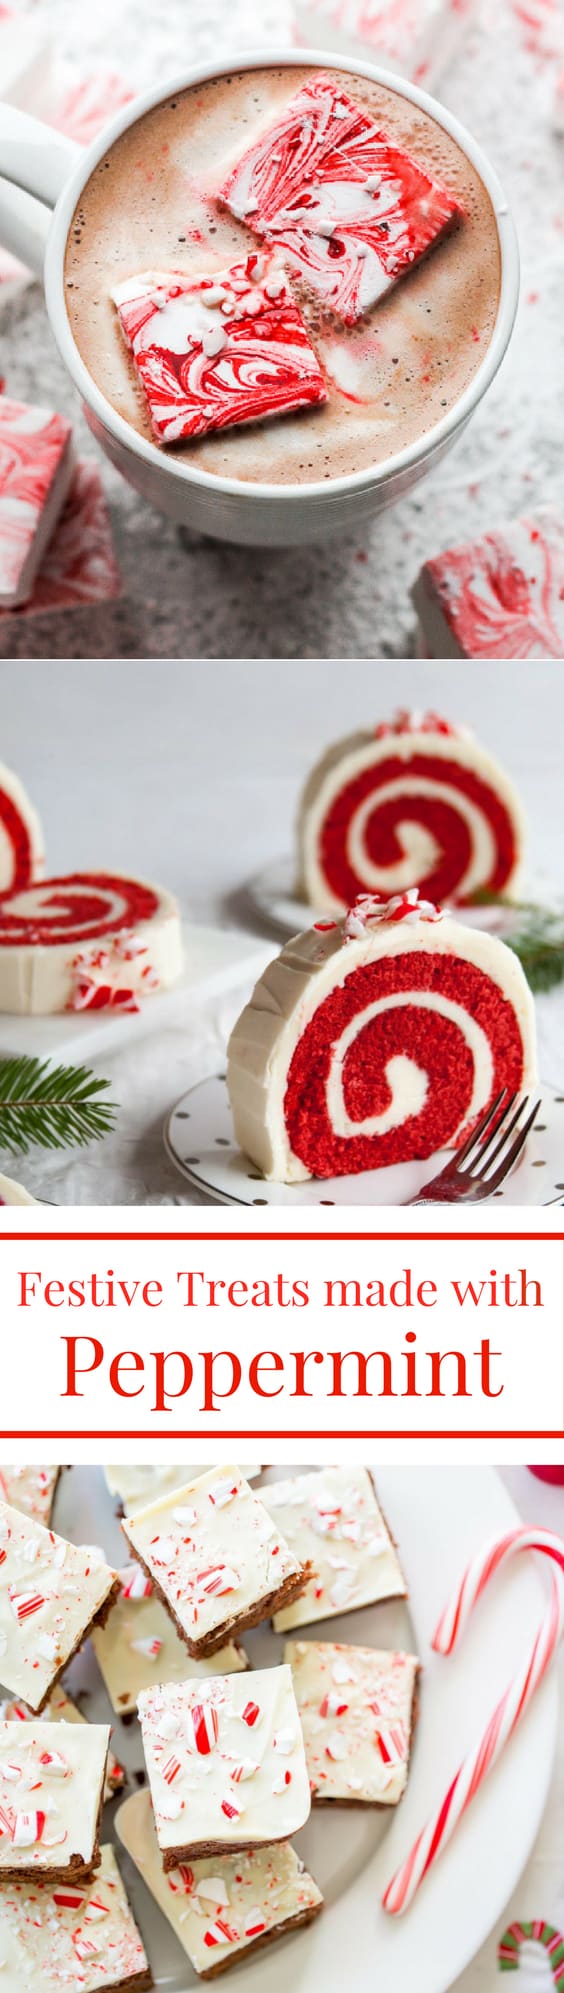 Festive Holiday Treats made with Peppermint!